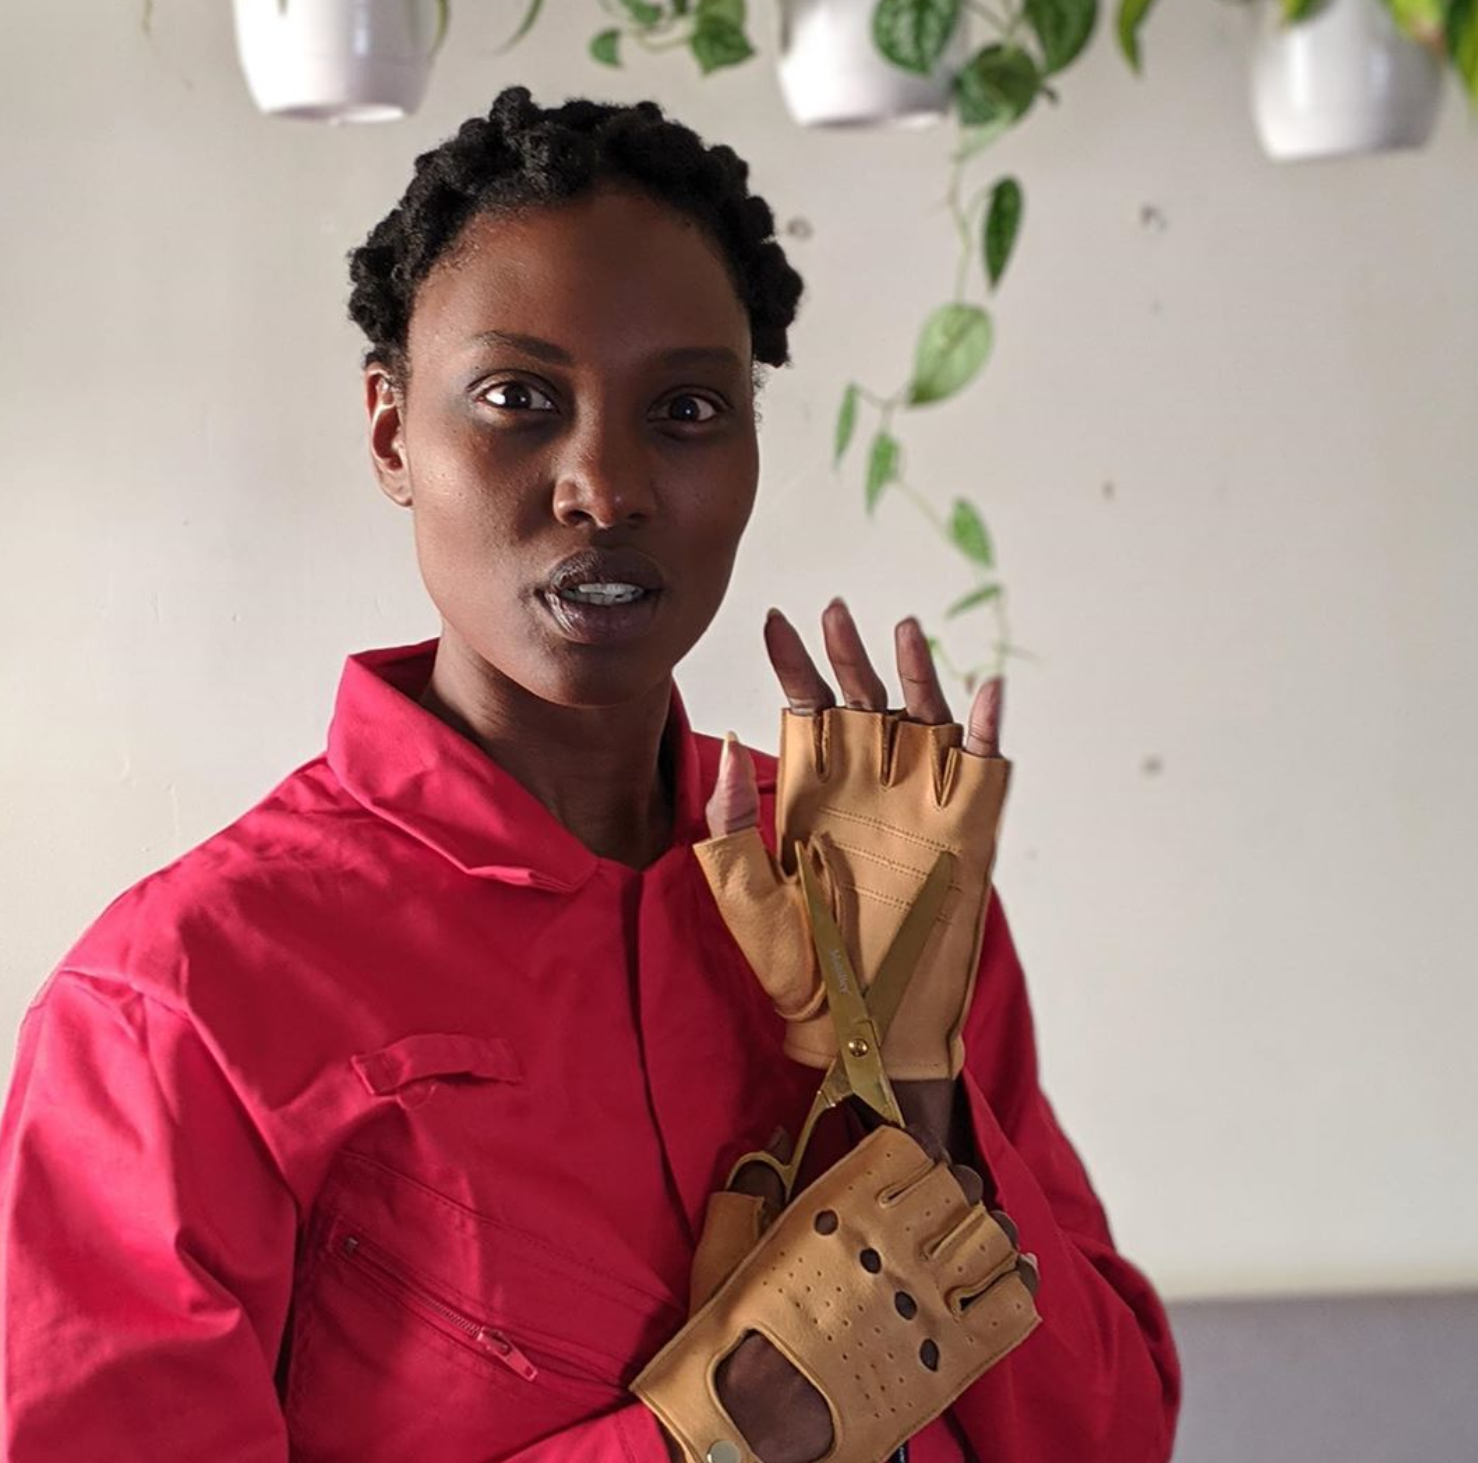 A woman holds scissors while wearing a red shirt and gloves.